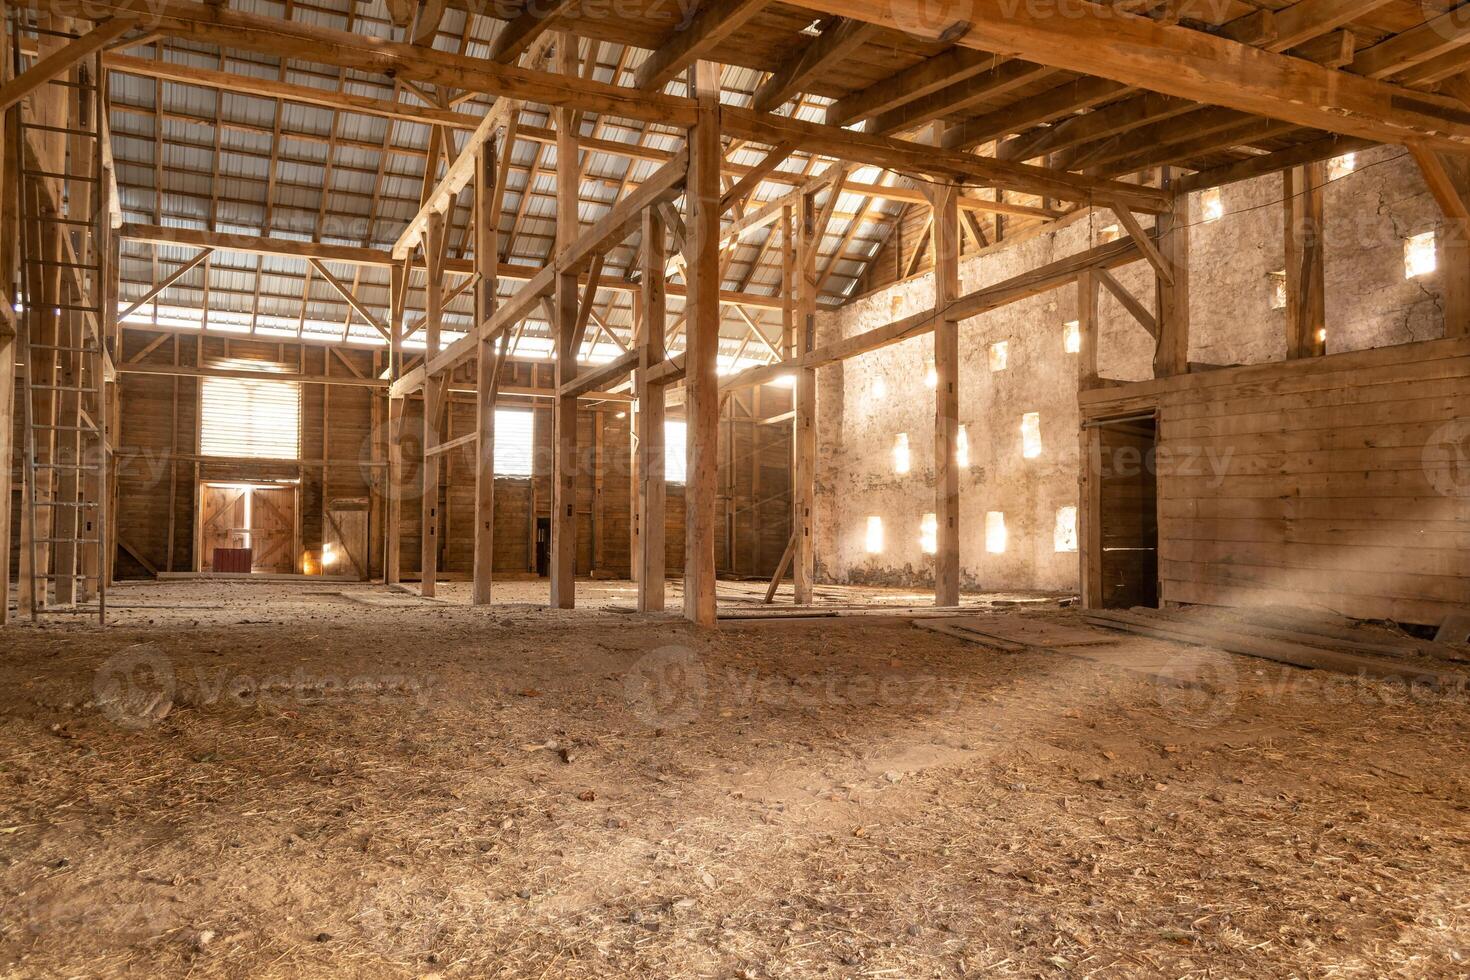 Sunlit Beams in an Empty, Dusty Farmhouse with Aged Wooden Structure photo